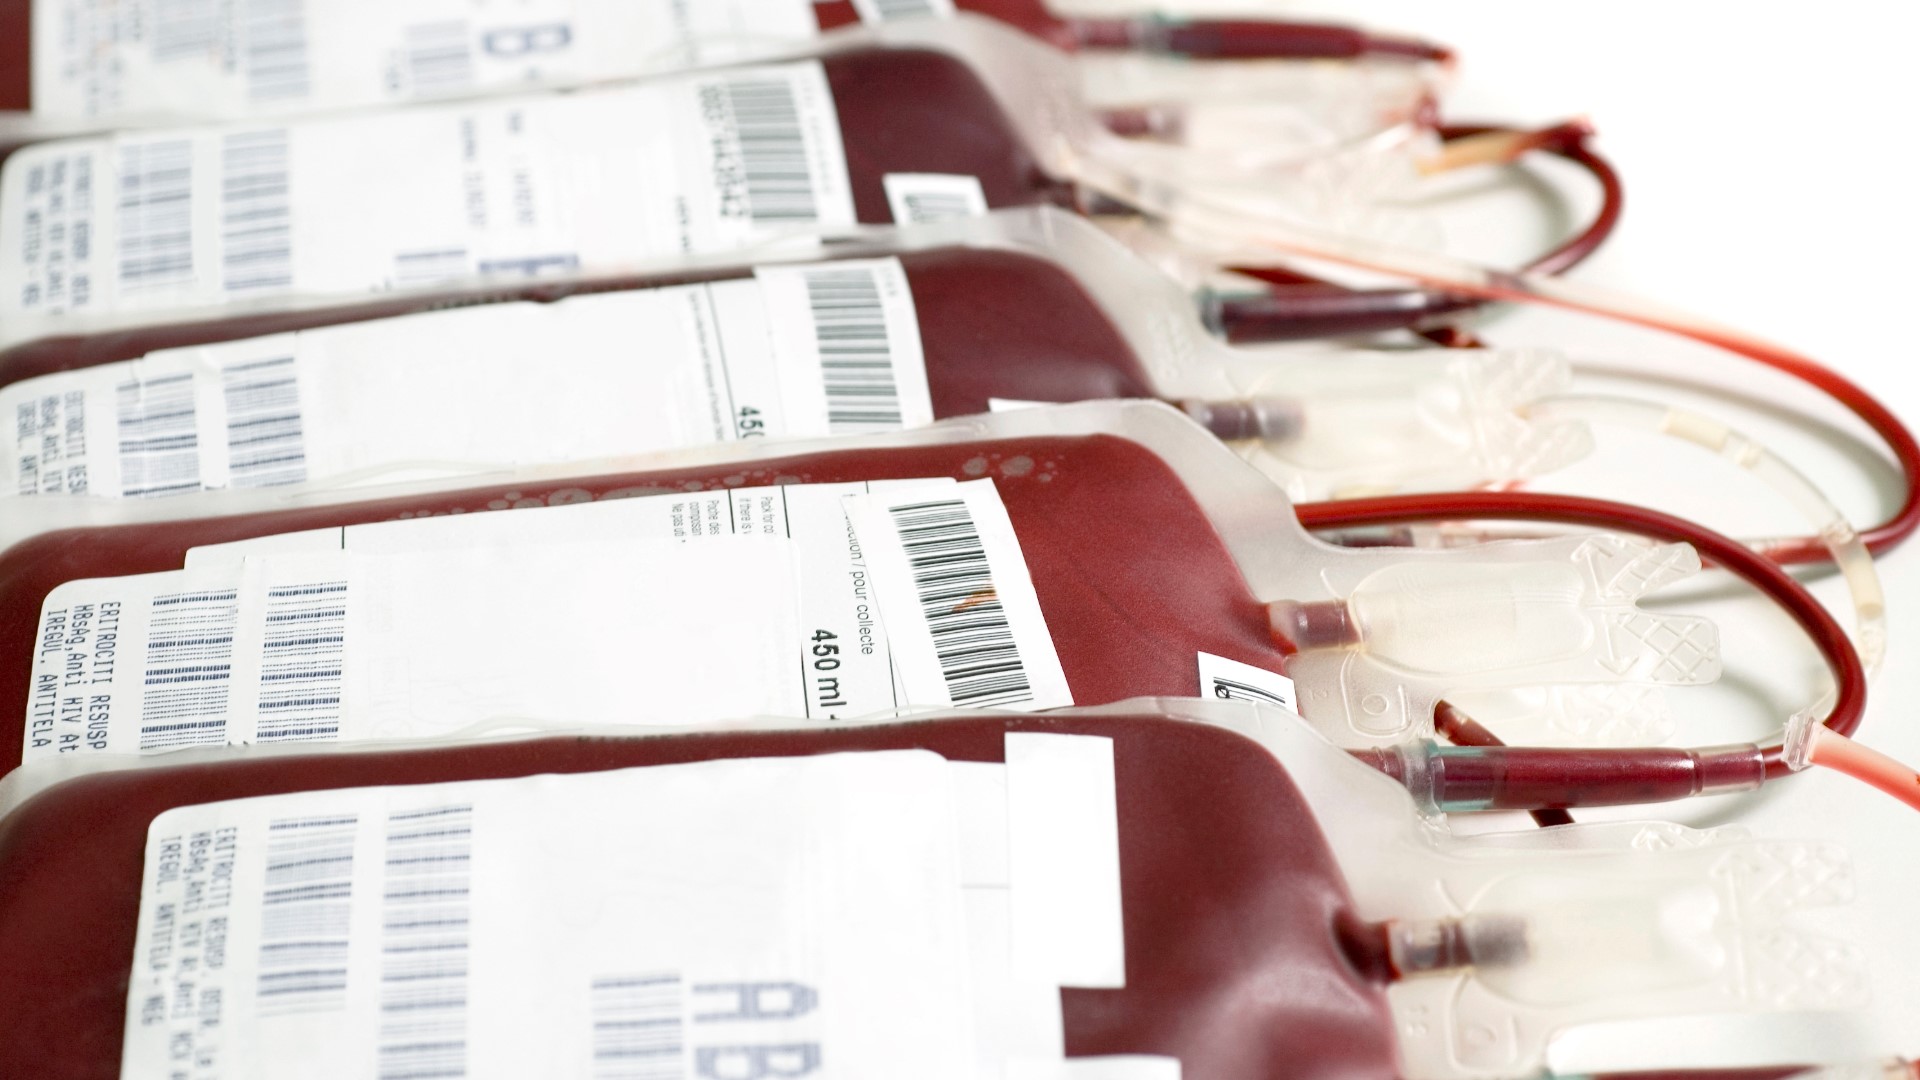 With blood banks already in crisis mode, sickle cell patients are on edge for what’s to come next.